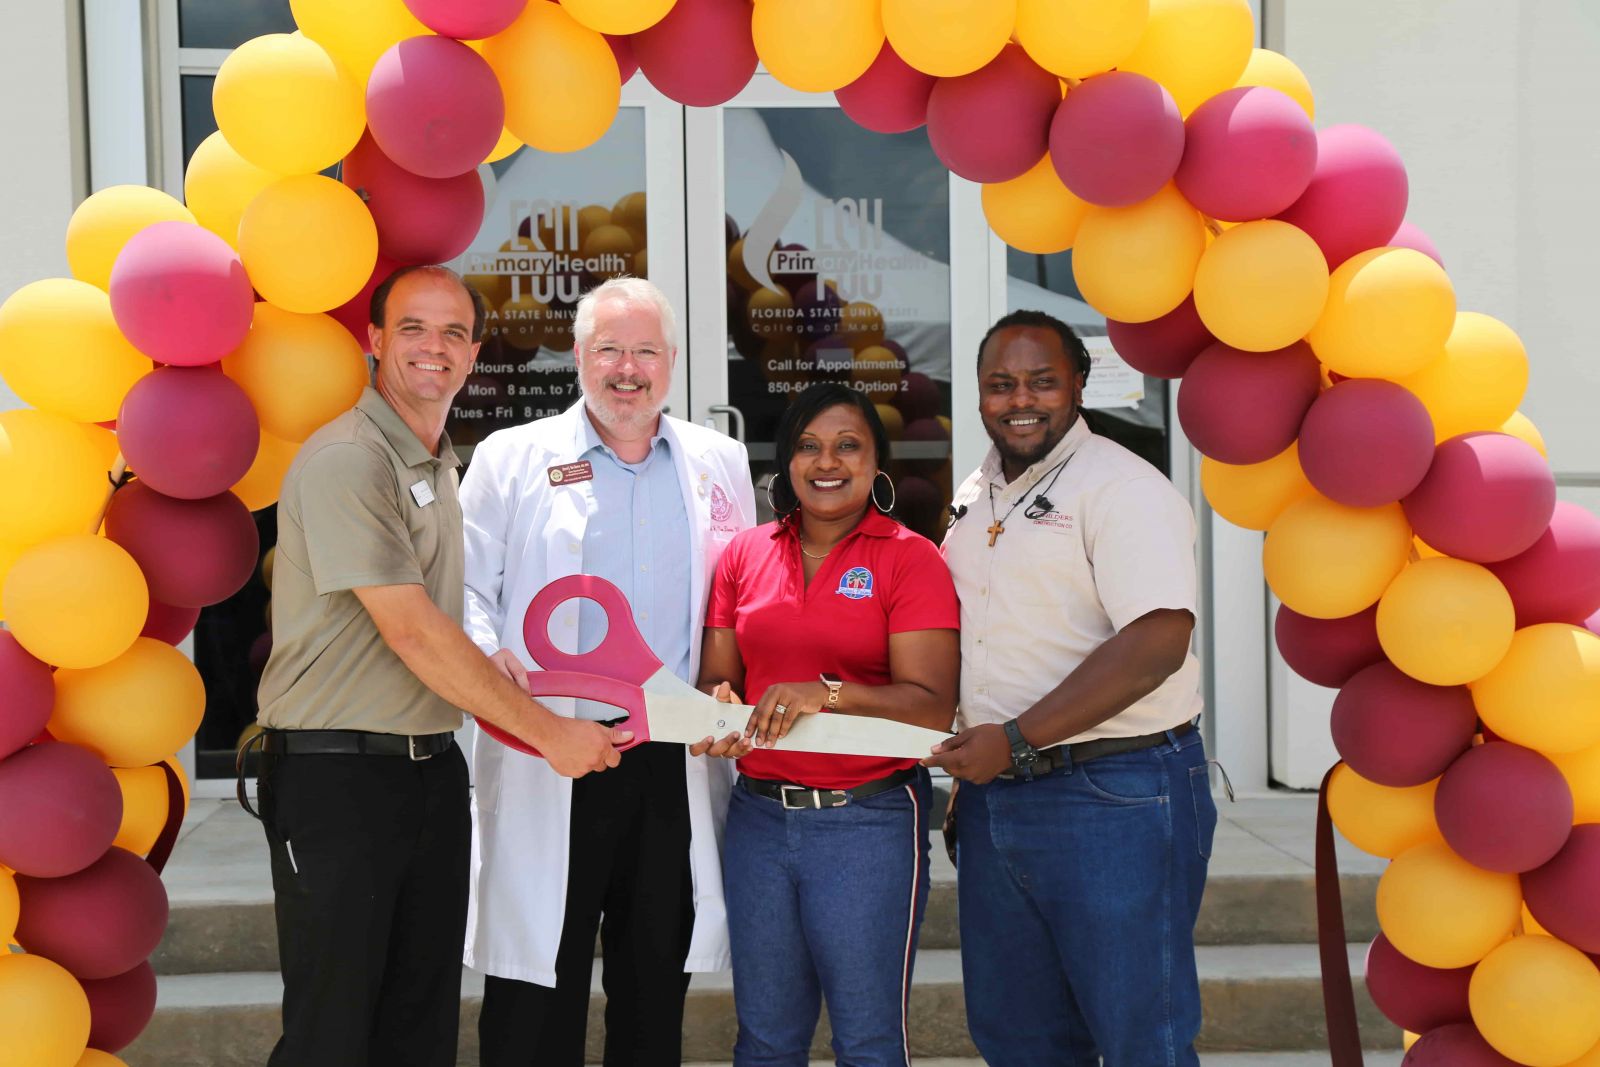 (Left to right) Jason Rybicki, vice president of FSU PrimaryHealth’s community advisory board; Daniel Van Durme, senior associate dean for clinical and community affairs; Anicia Robinson, principal of Sabal Palm Elementary; and Johnnie Seals, a neighborhood resident and job-site superintendent for Childers Construction, cut the ribbon at the College of Medicine's new primary-care health health center, FSU PrimaryHealth.